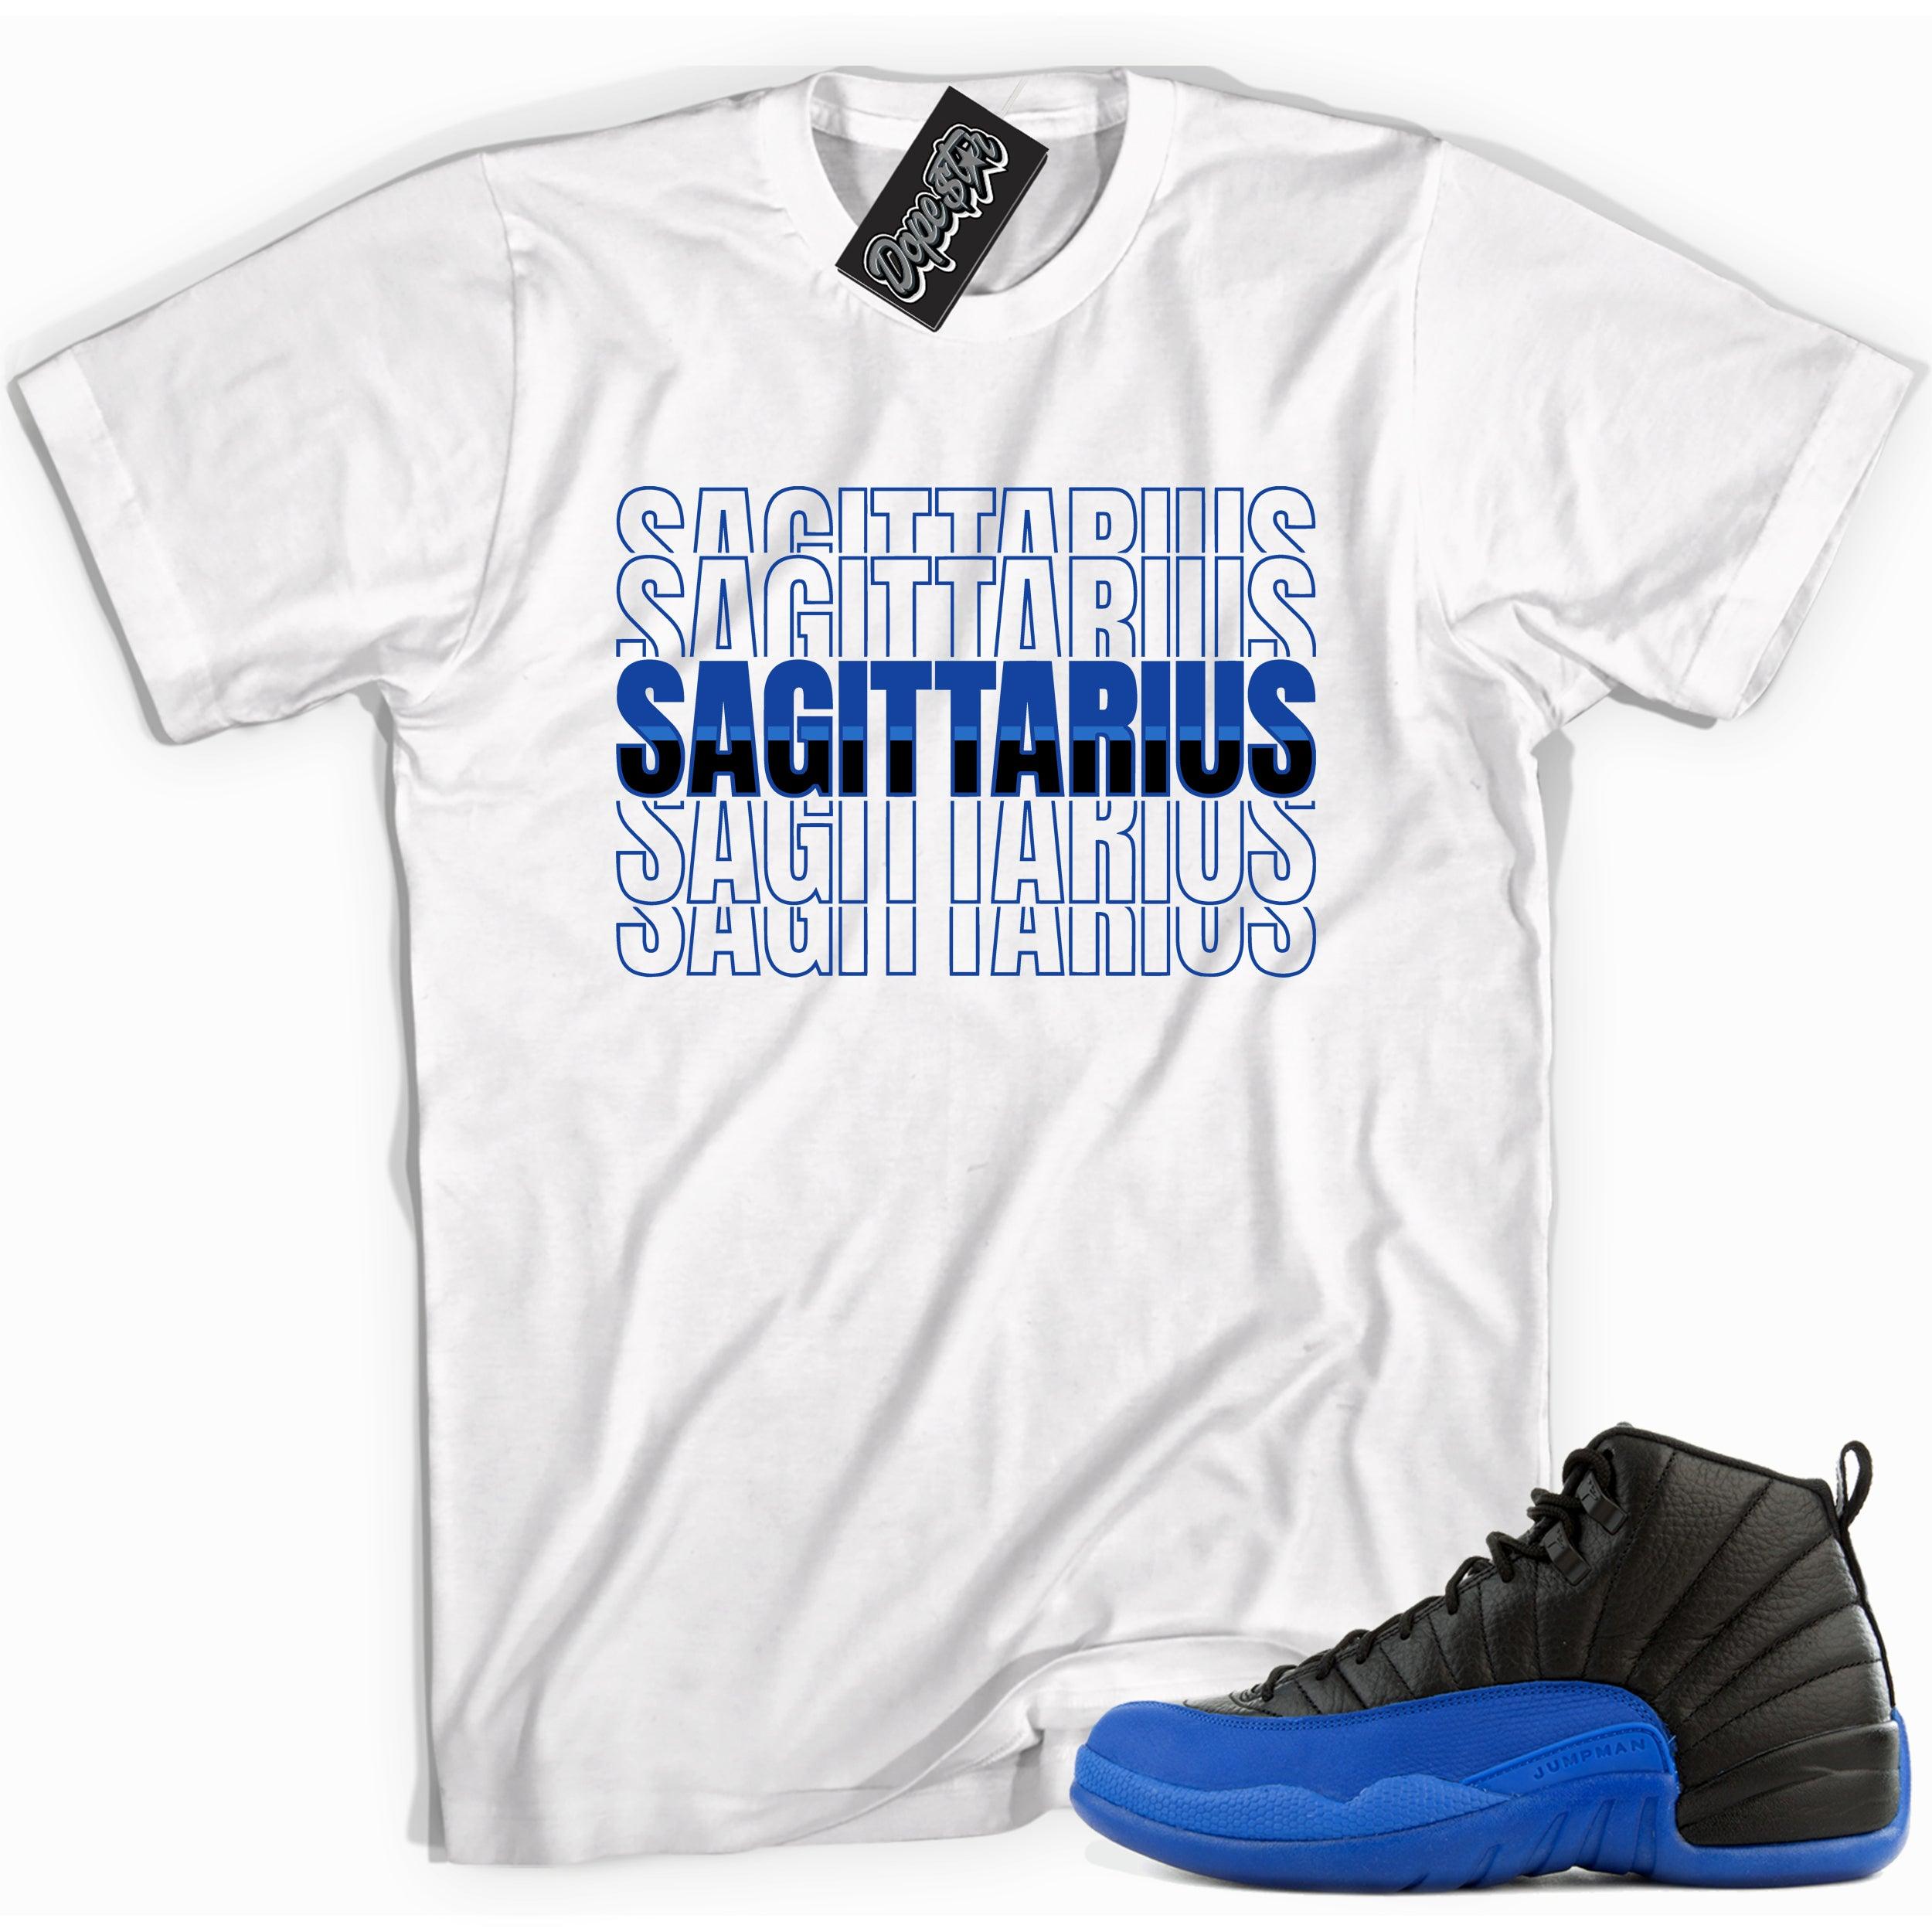 Cool white graphic tee with 'sagittarius' print, that perfectly matches  Air Jordan 12 Retro Black Game Royal sneakers.